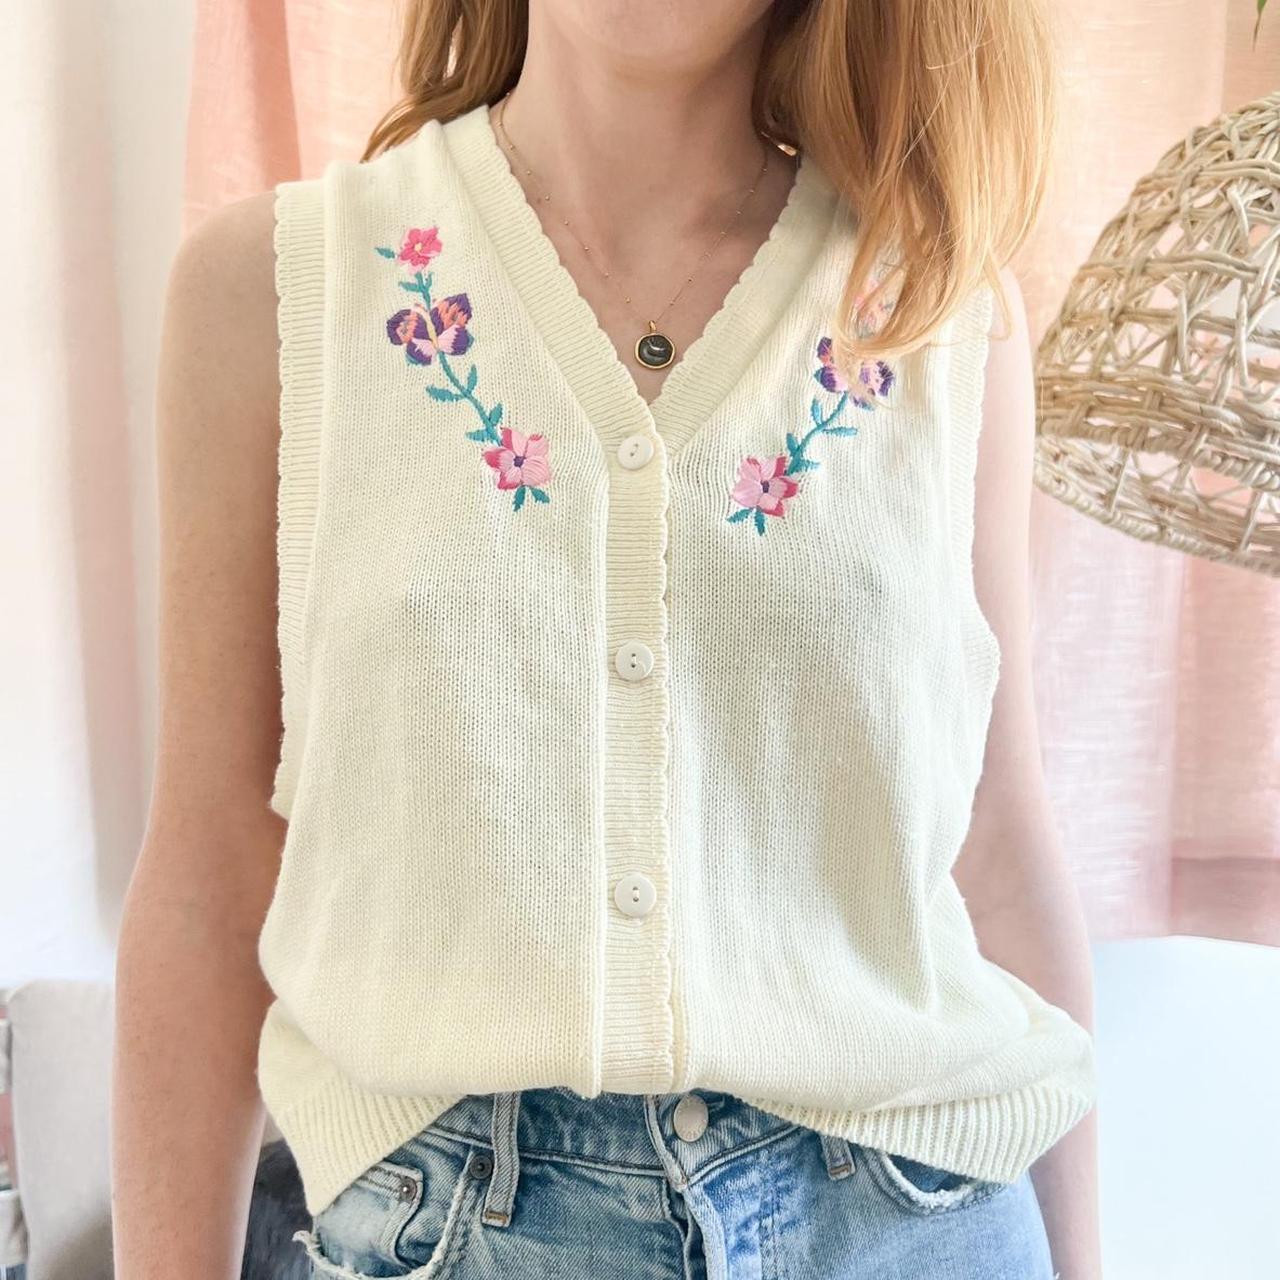 Super cute knit embroidered sweater vest top by S G...